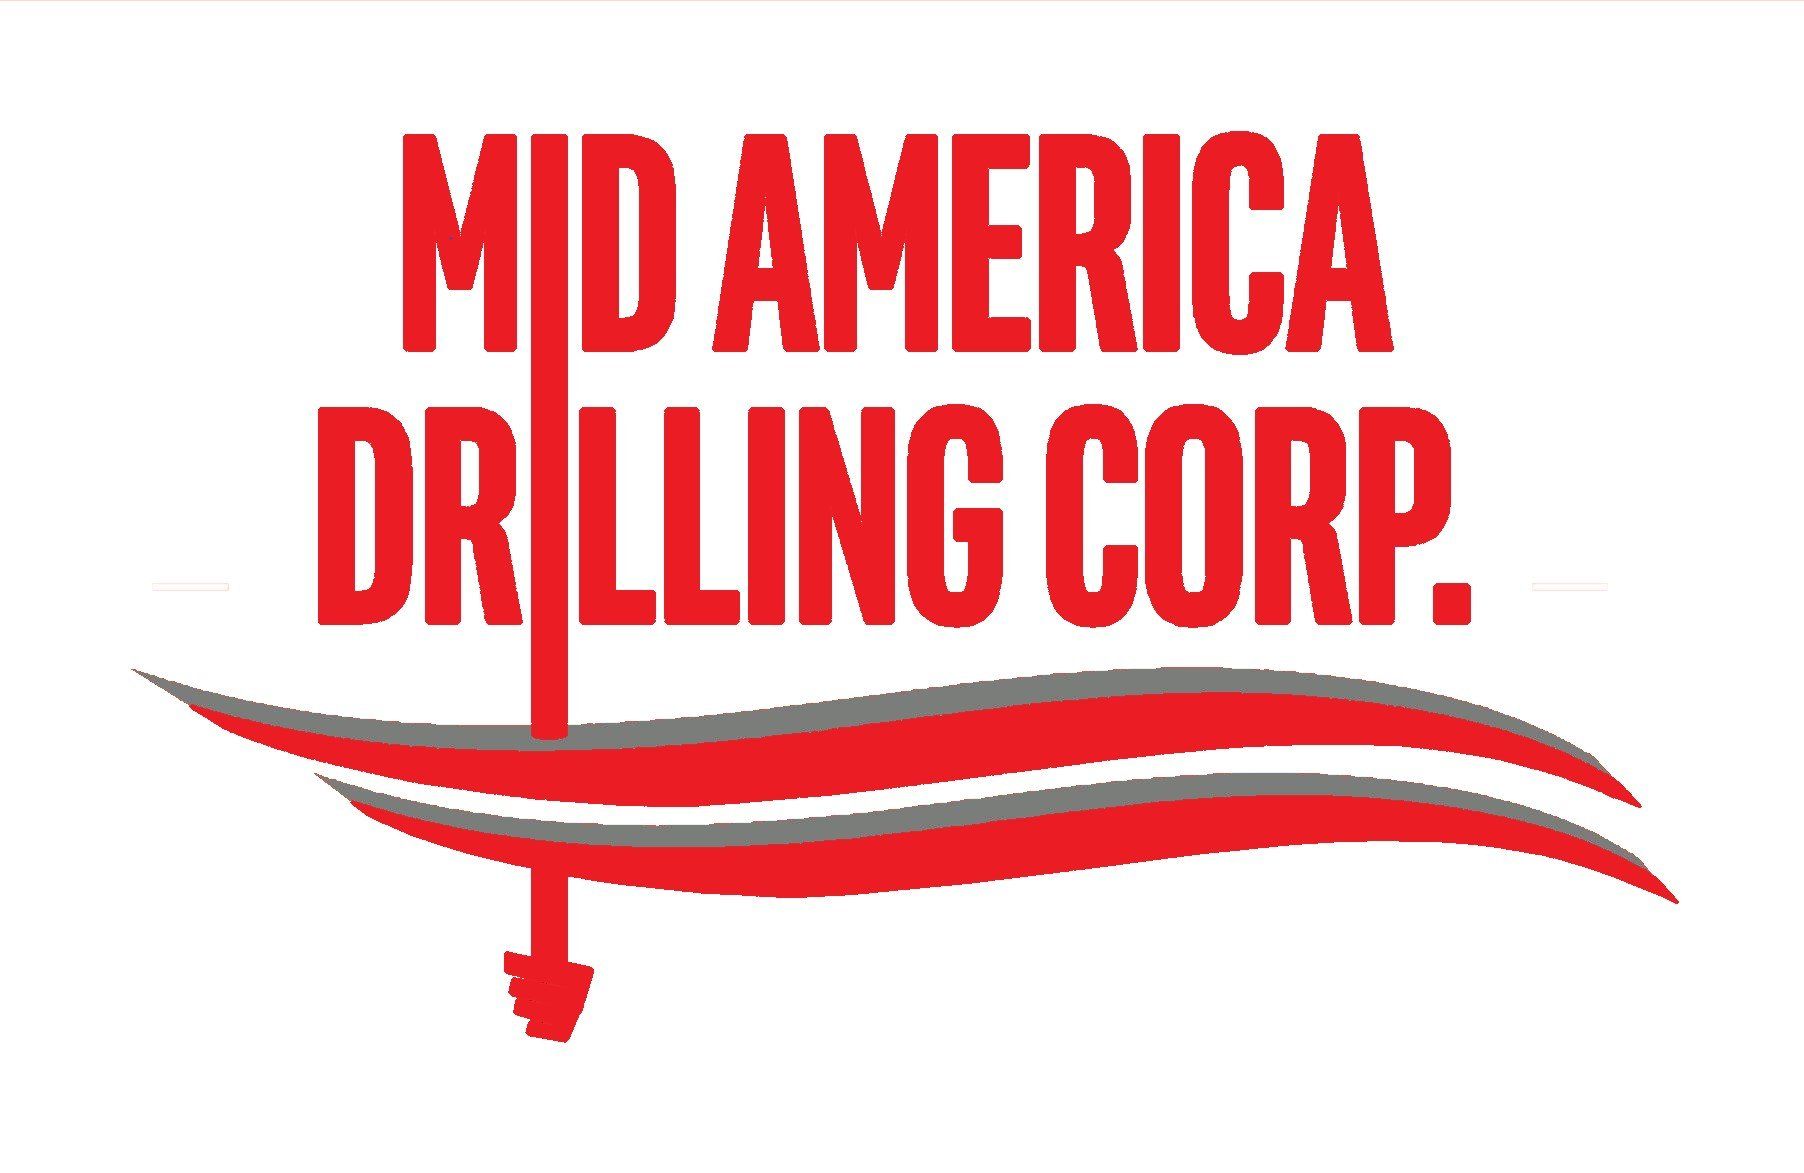 Mid-America Drilling Corp